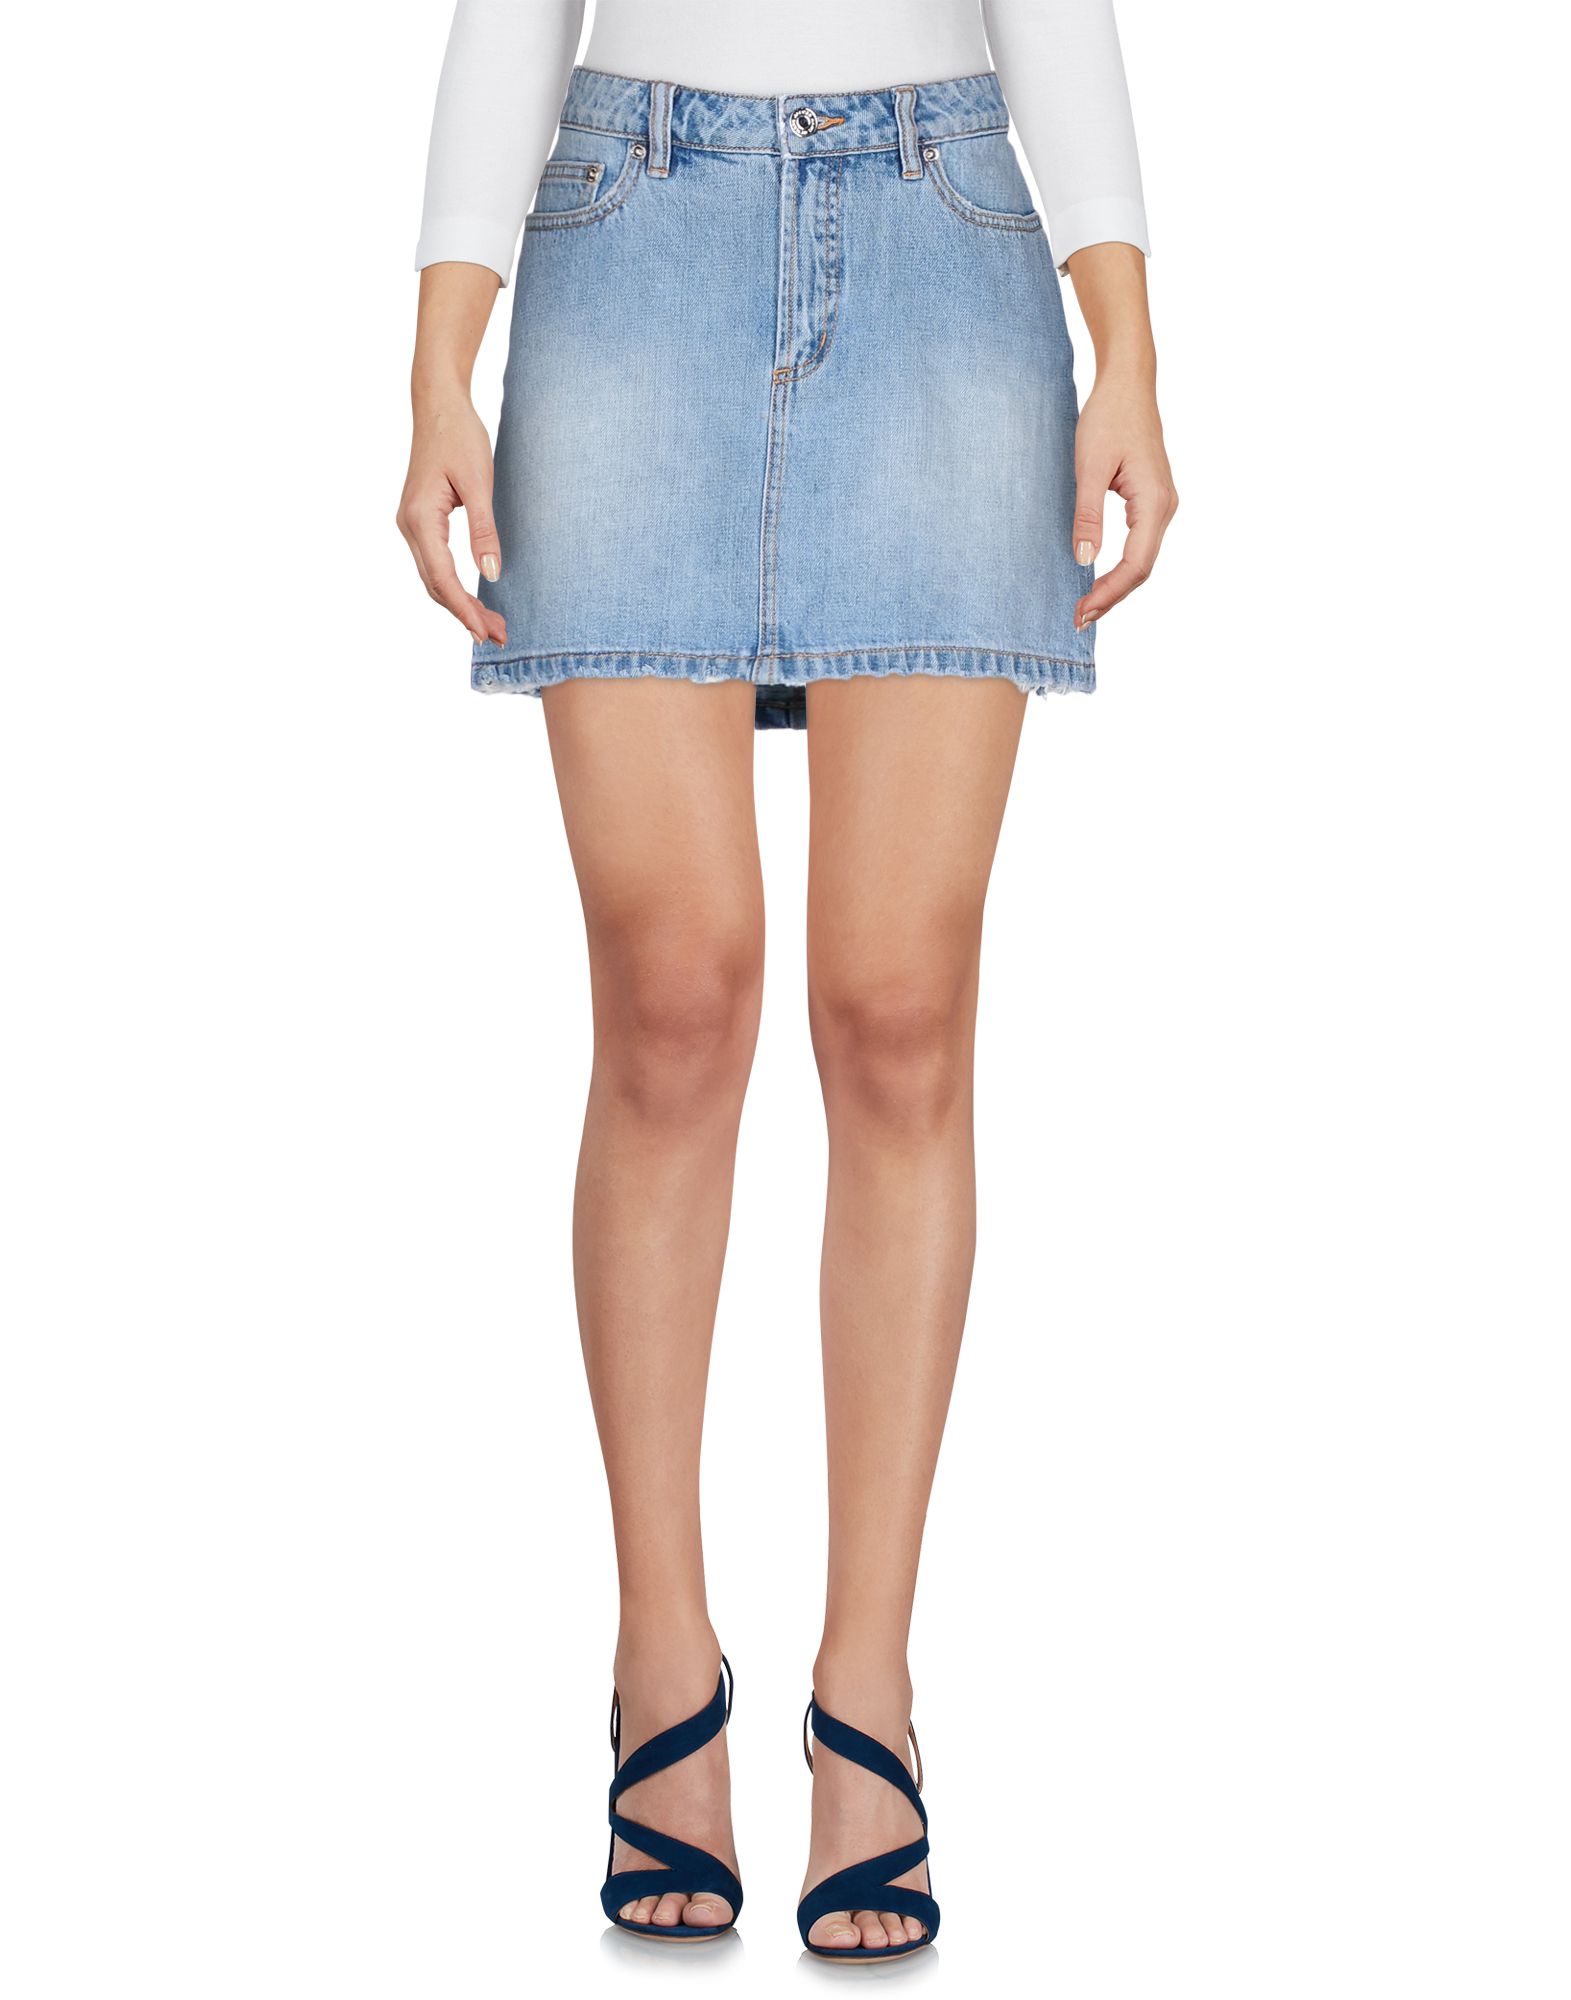 Marc By Marc Jacobs Denim Skirts | Shop at Ebates